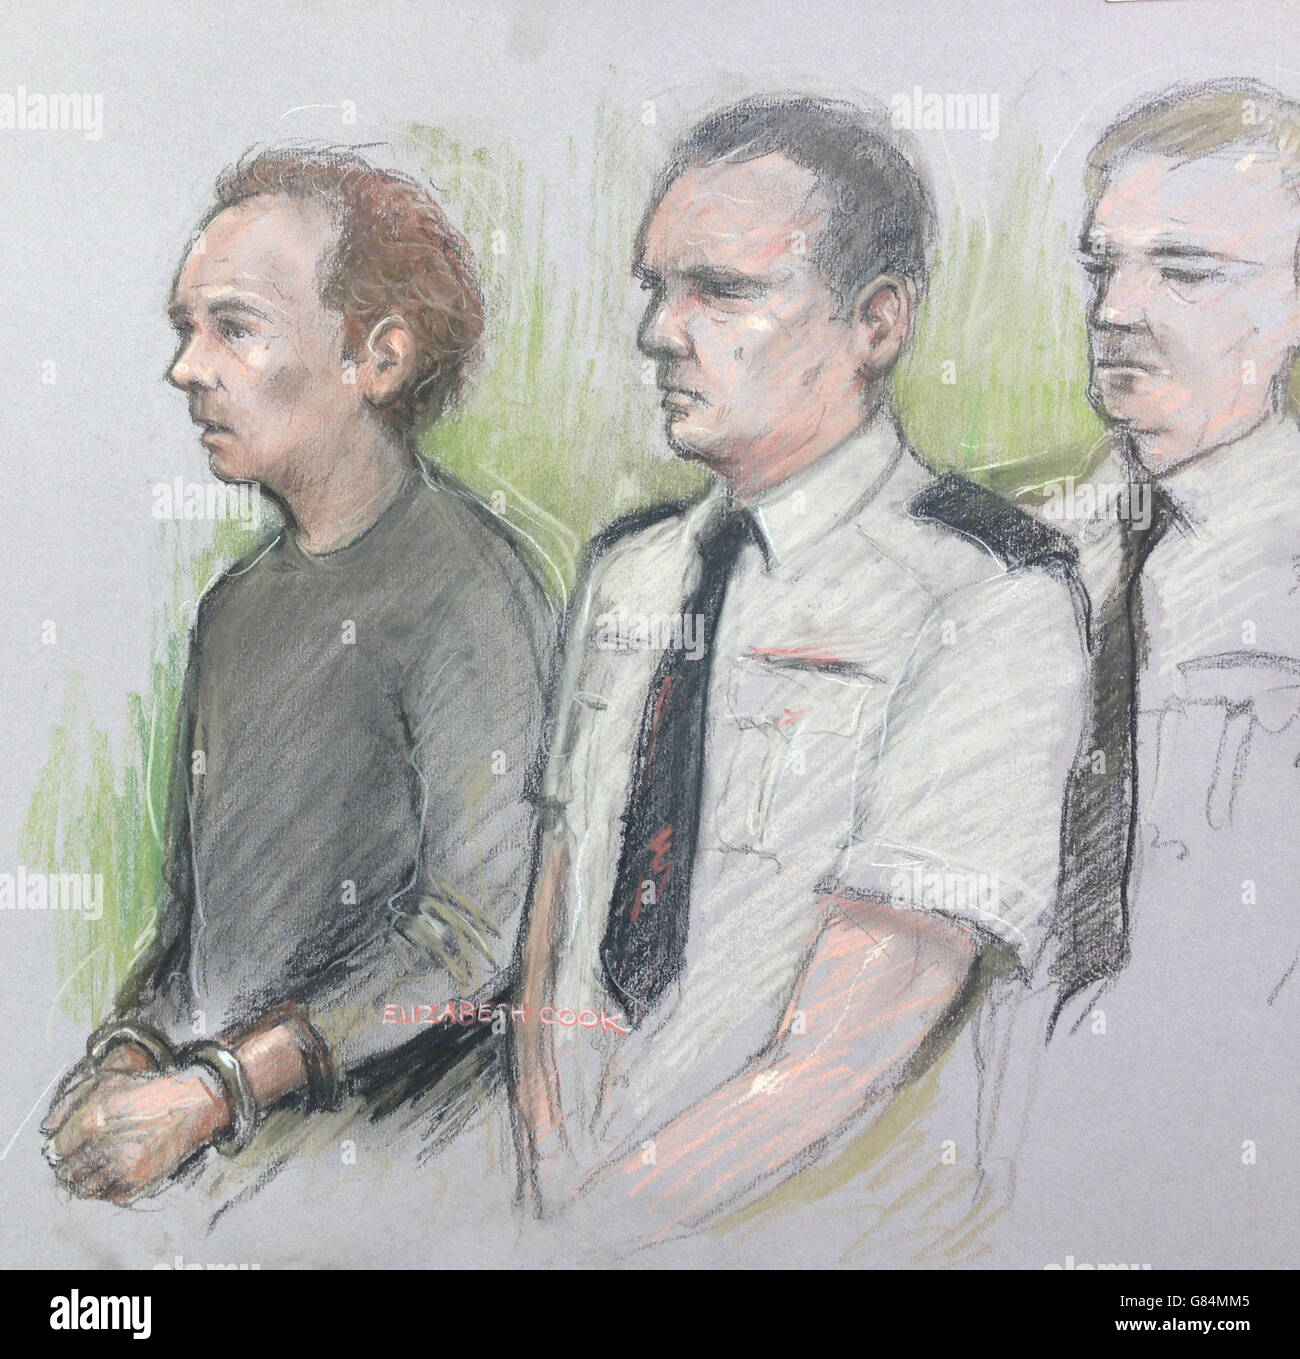 Court artist sketch by Elizabeth Cook of Matthew Daley (left) at Crawley Magistrates Court where he was charged with murdering a great-grandfather Donald Lock in a road rage stabbing after a car crash. Stock Photo